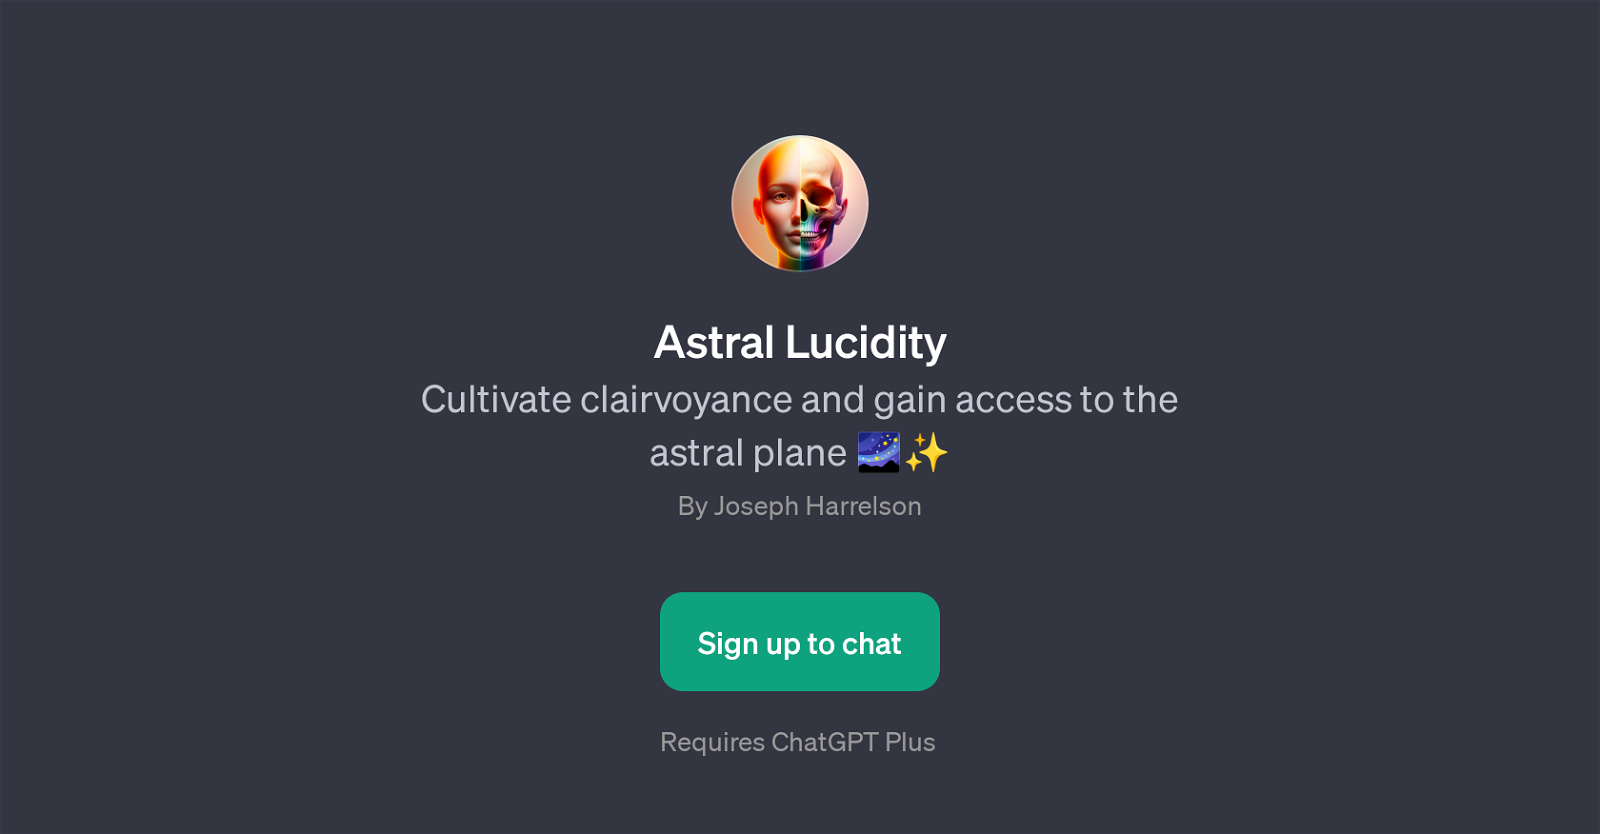 Astral Lucidity website